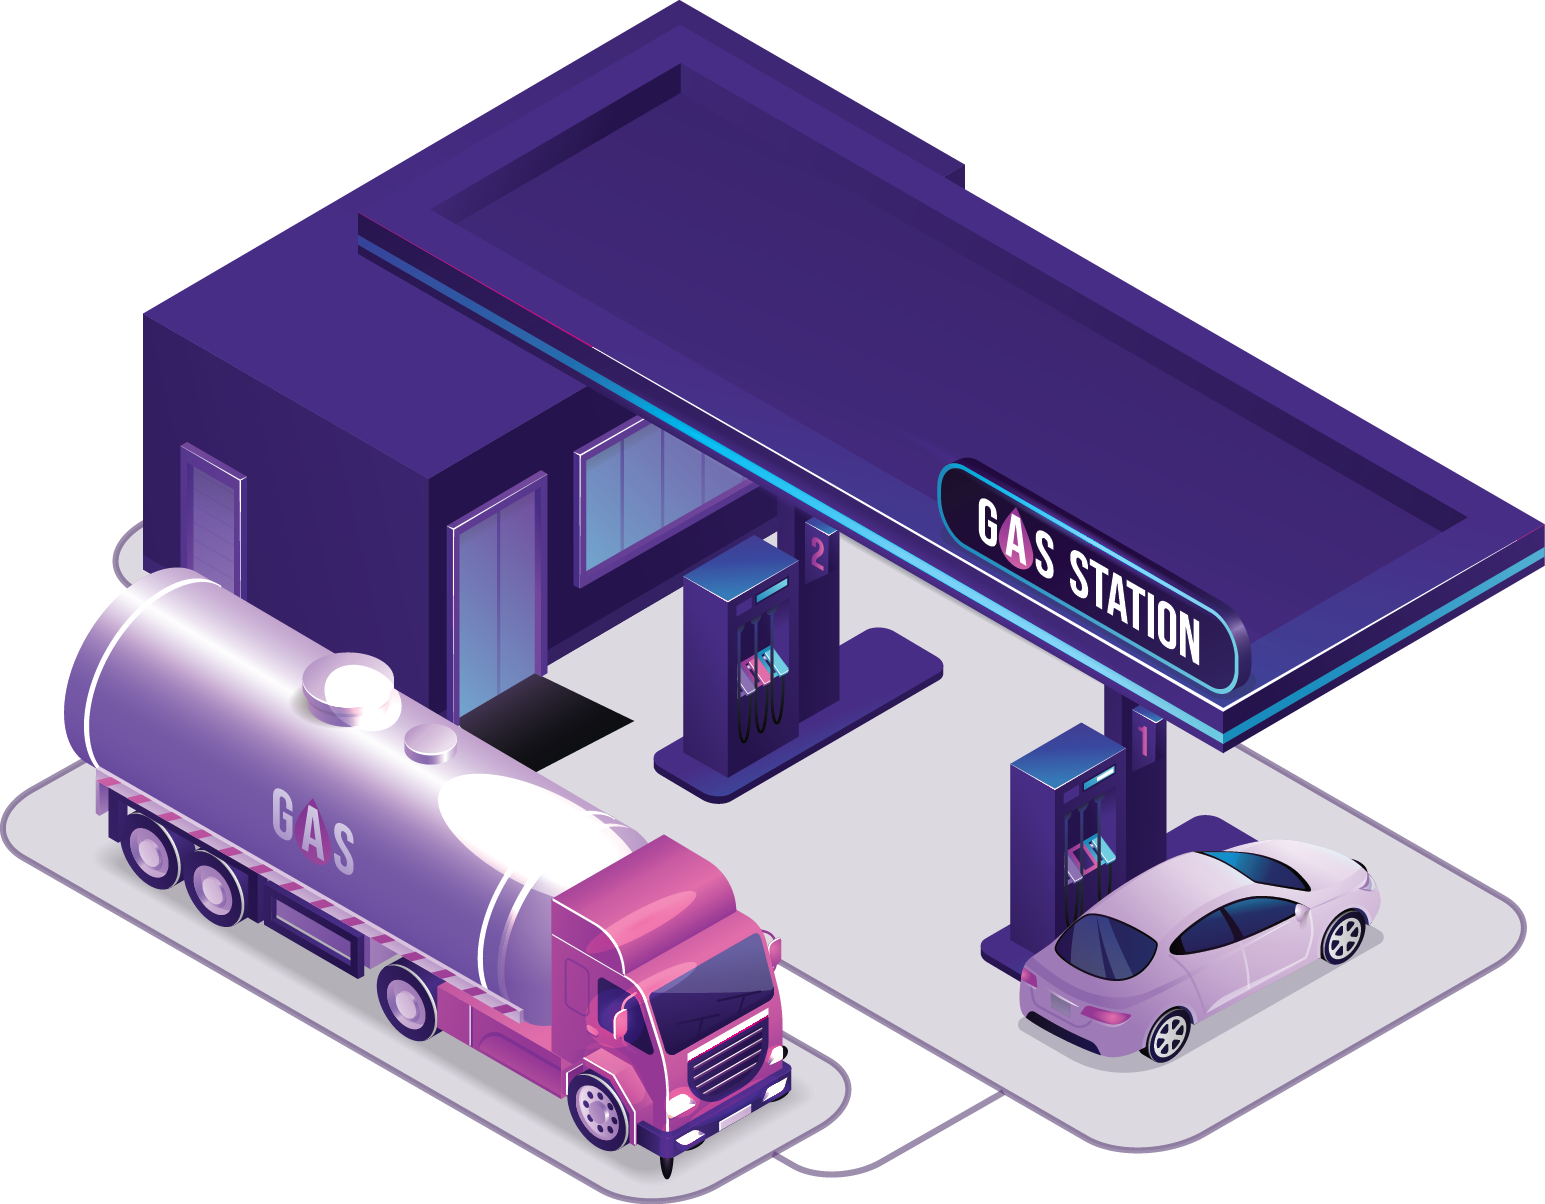 Our most advanced Fuel management solutions is a one stop solution for monitoring fuel consumption, mileage and prevent fuel theft. It provides a cost-effective way to reduce fuel costs and save fuel expenses.